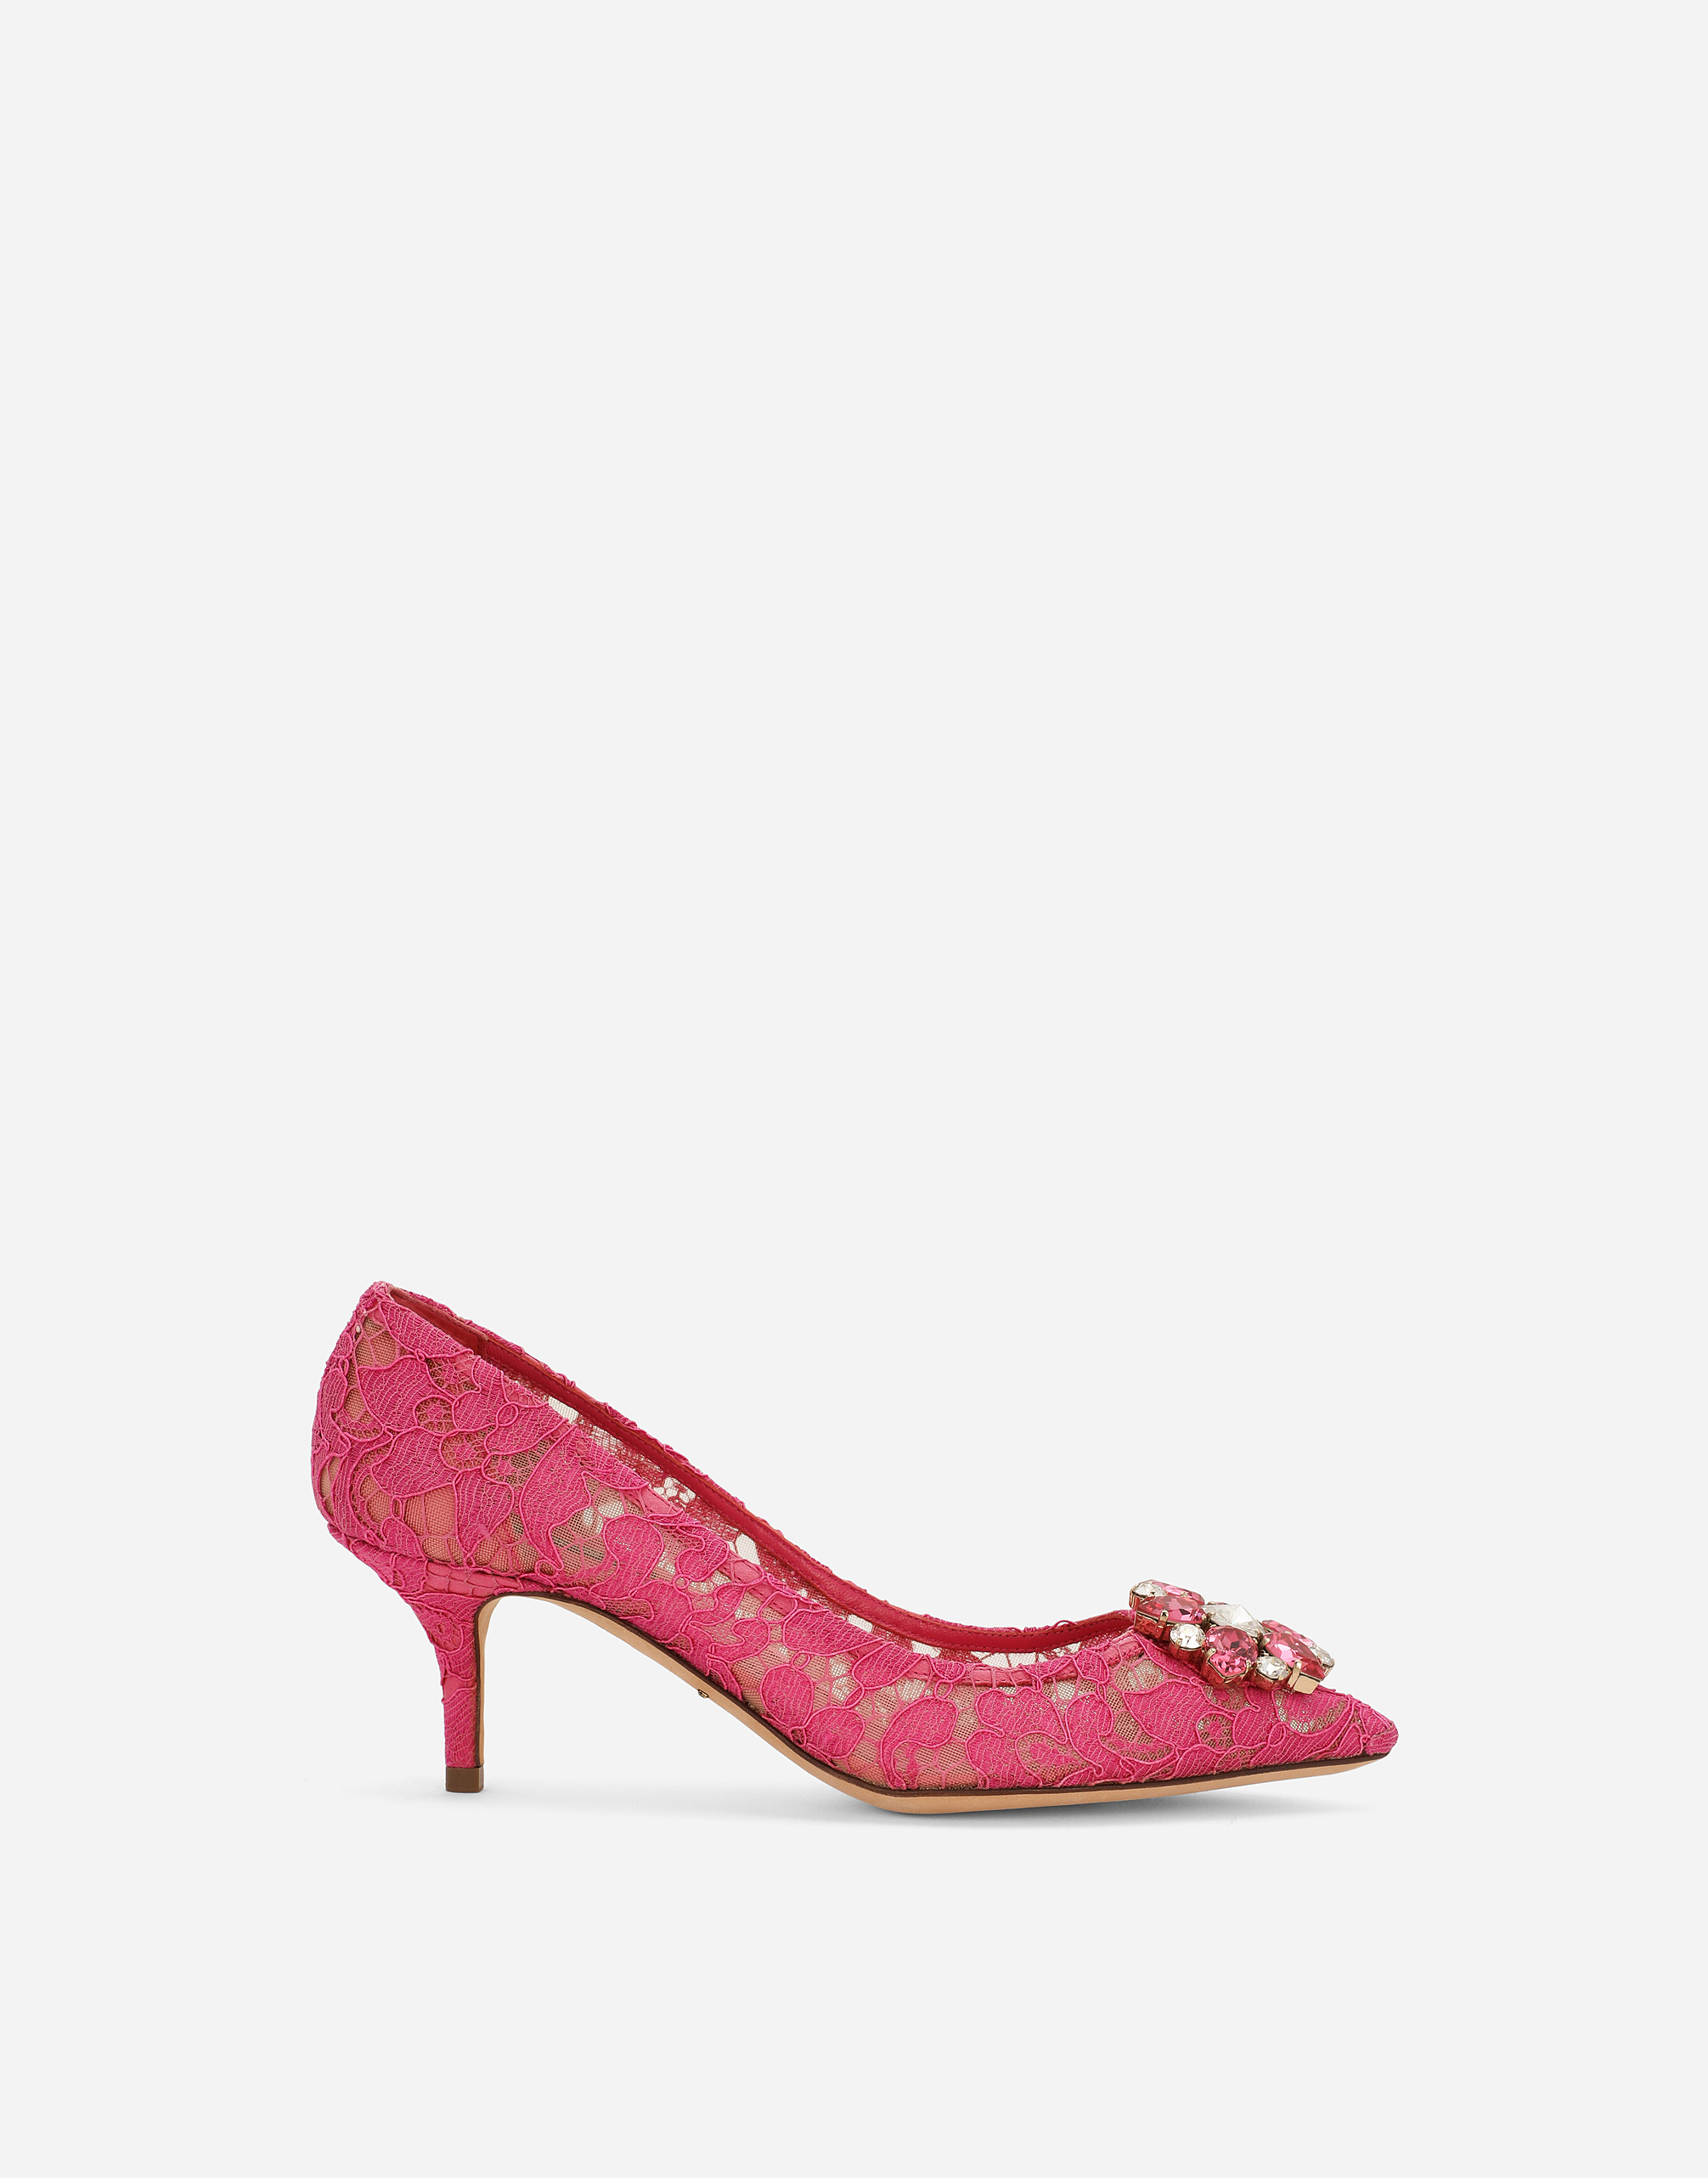 Pump in Taormina lace with crystals in Fuchsia